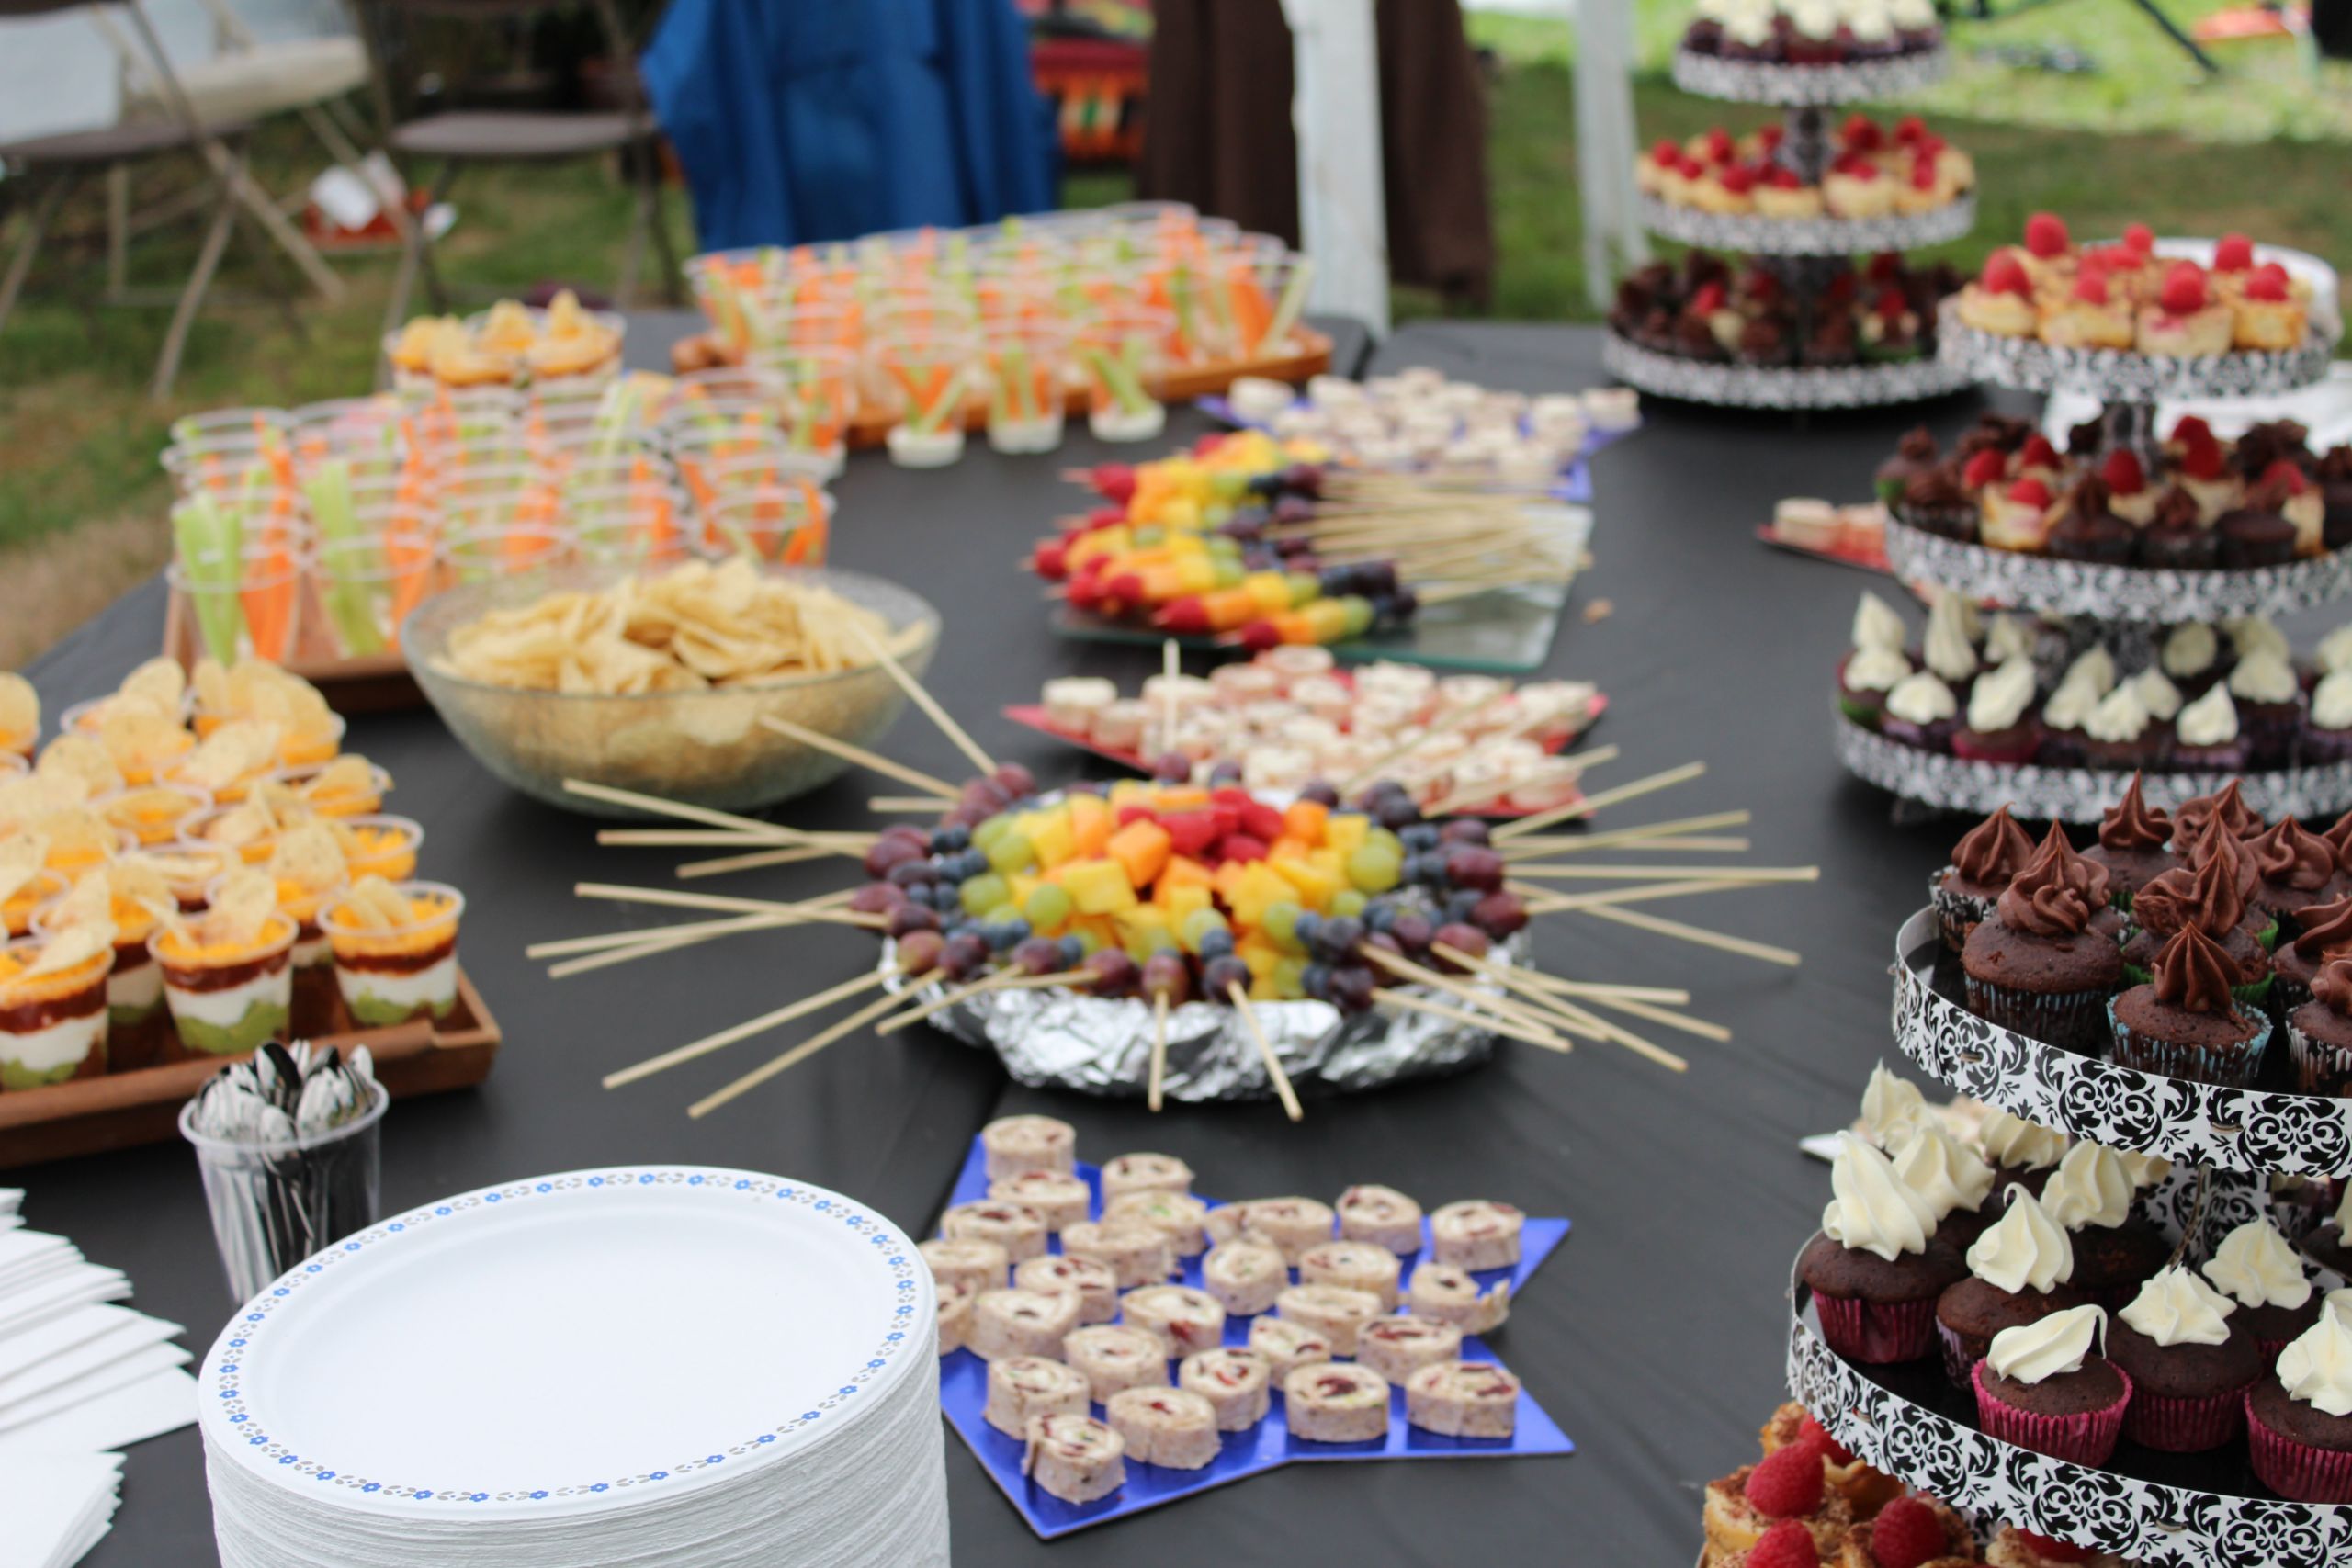 Ideas For Food For Graduation Party
 Party Food